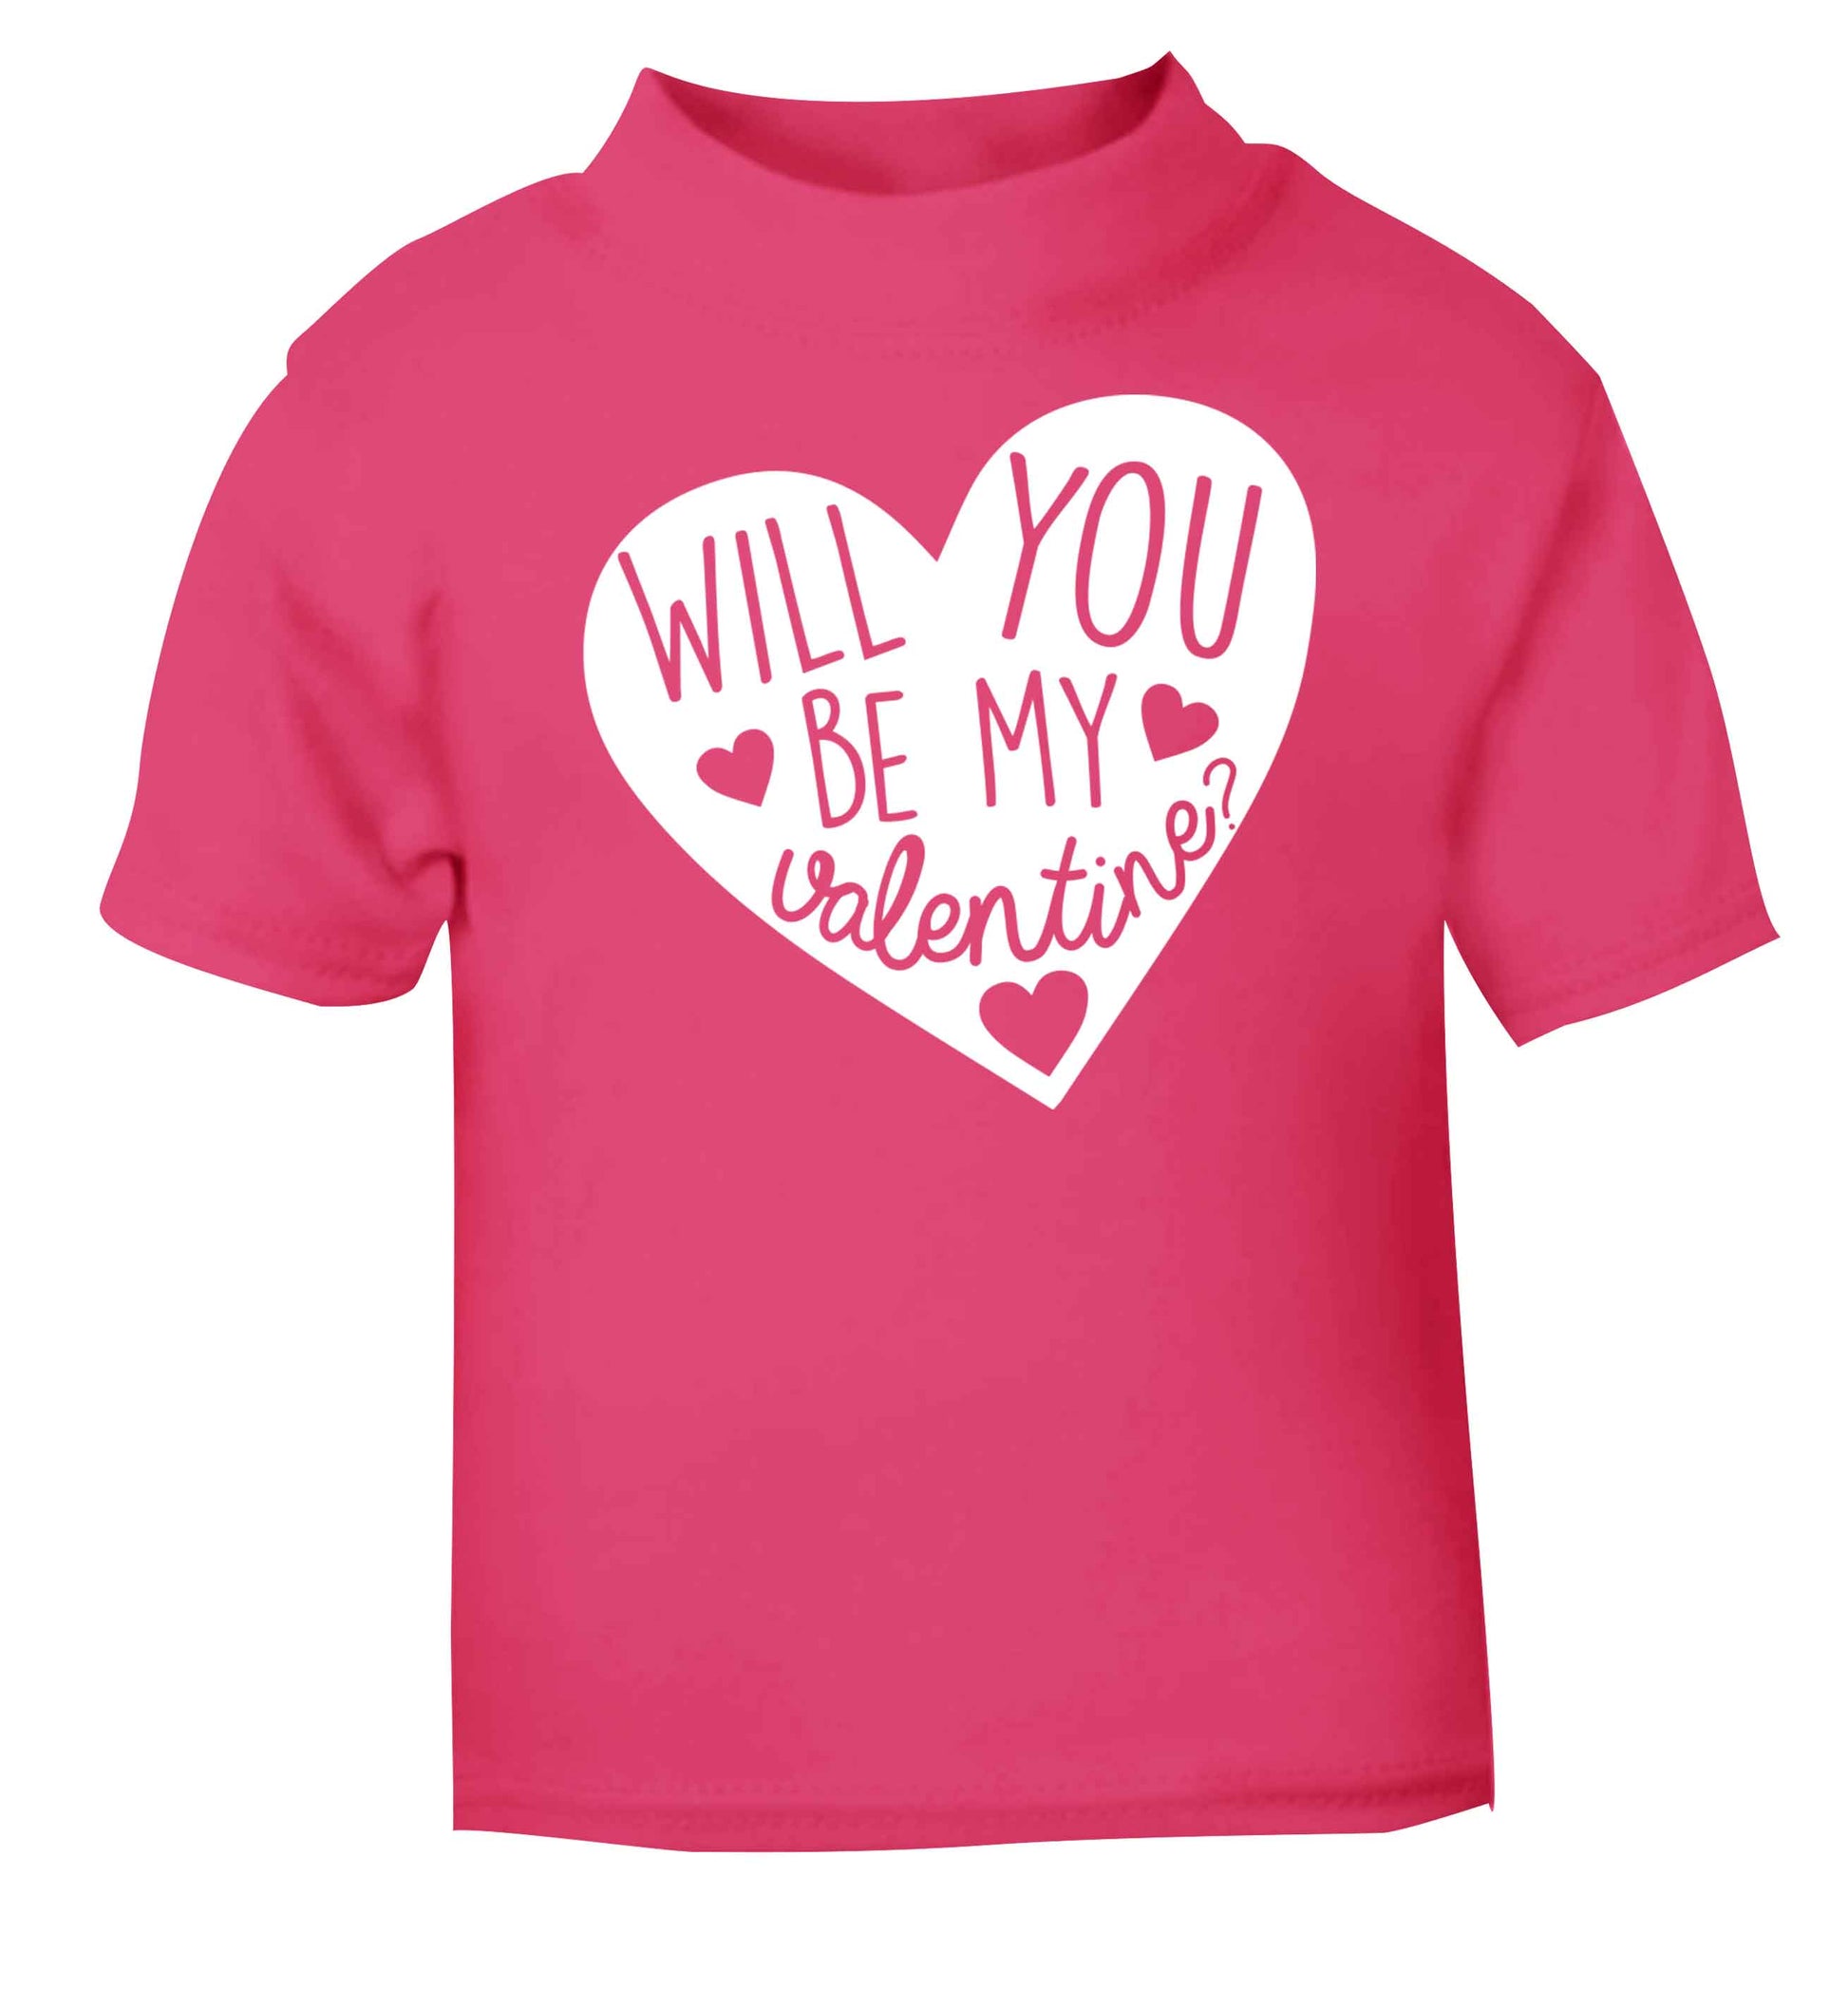 Will you be my valentine? pink baby toddler Tshirt 2 Years